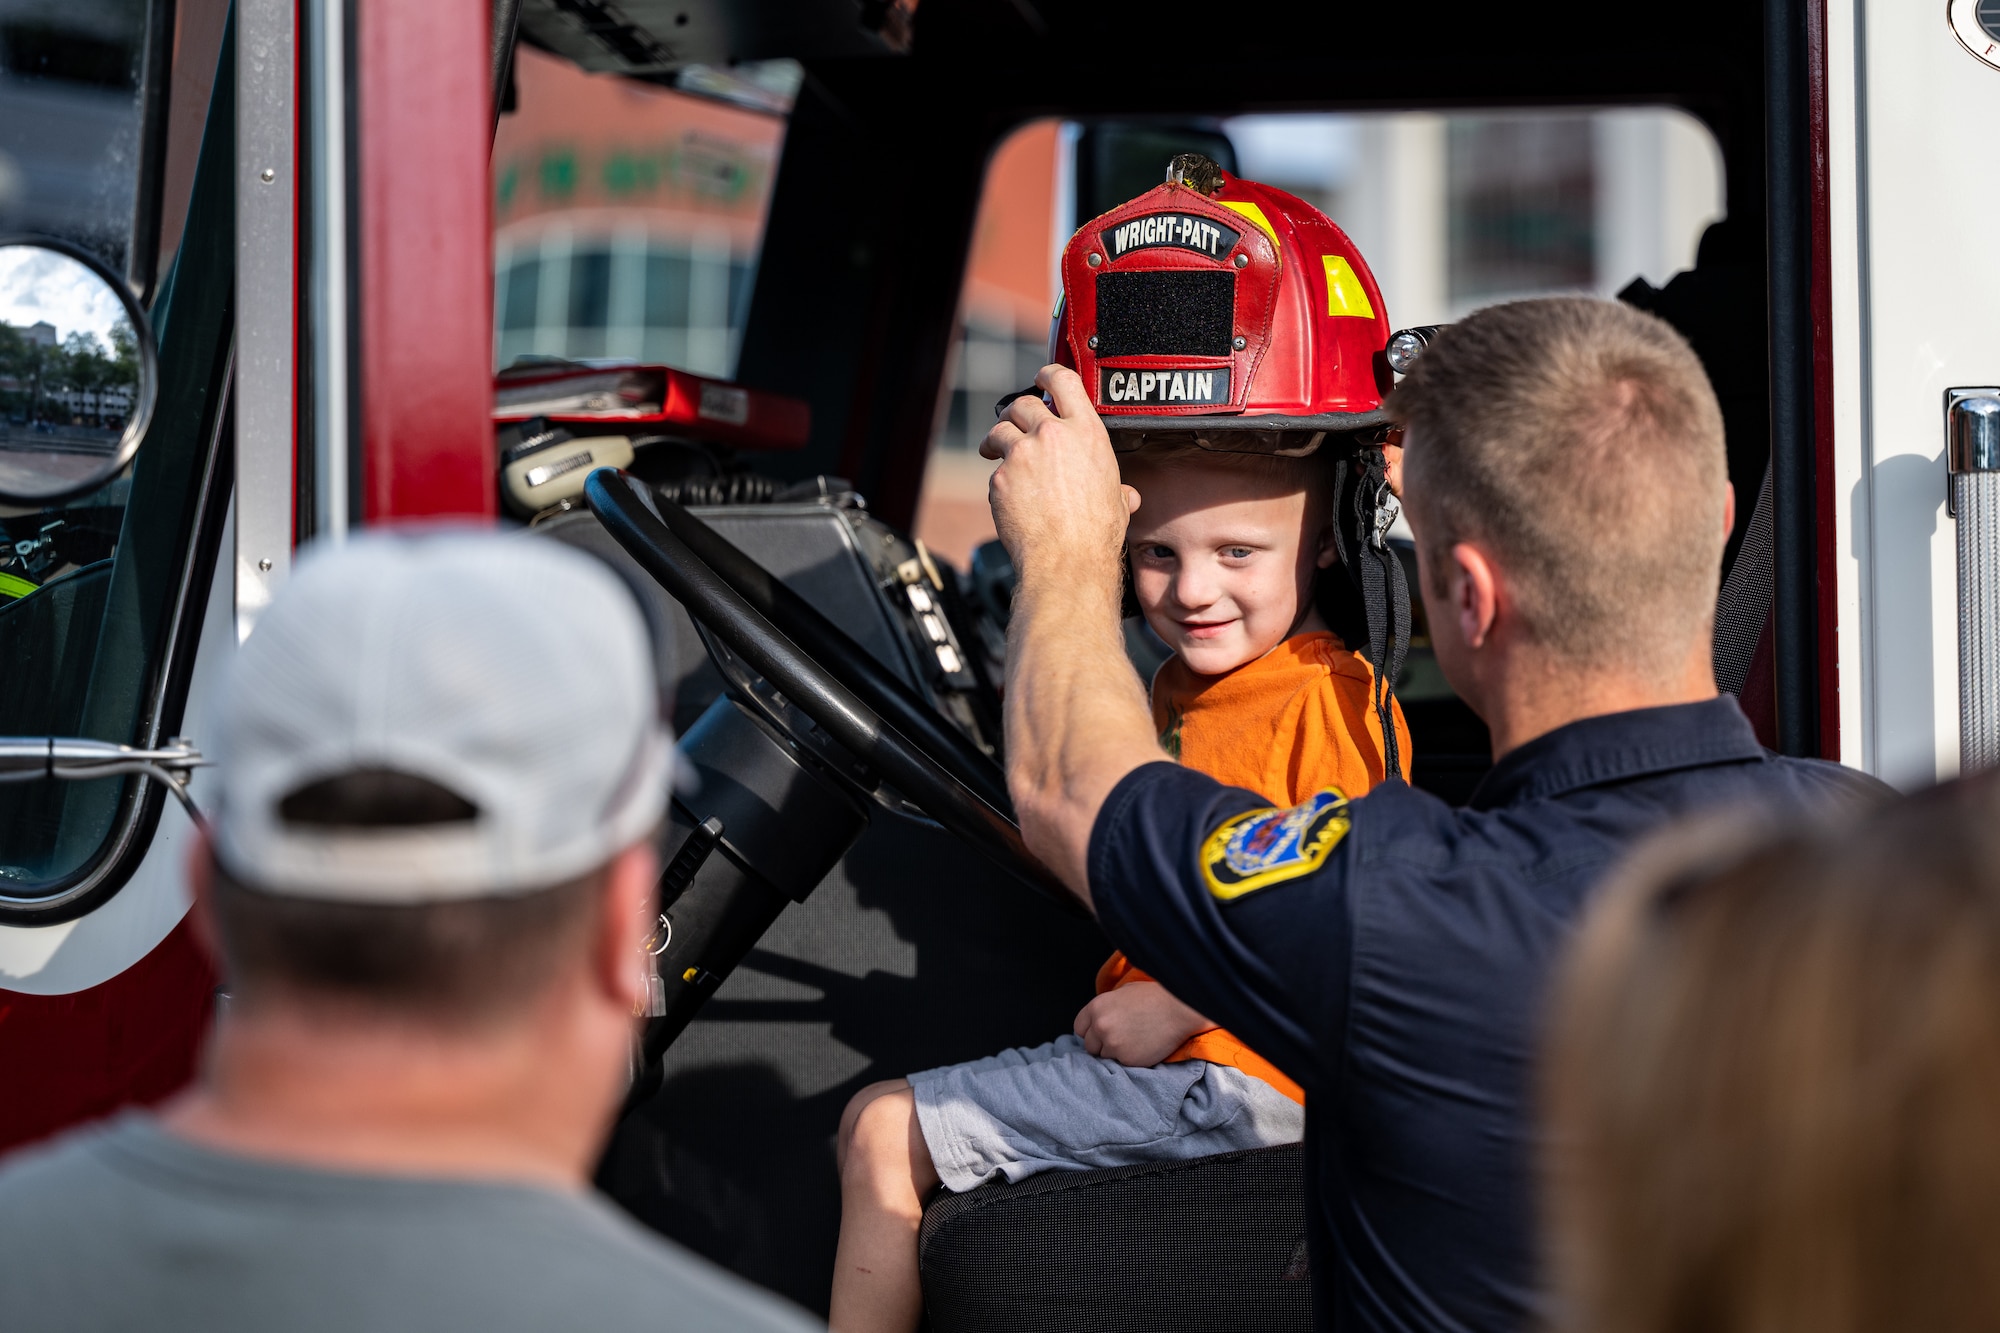 A young boy sits in the cap of a fire truck as a man in a firefighter's uniform, places a red fire helmet on his head.